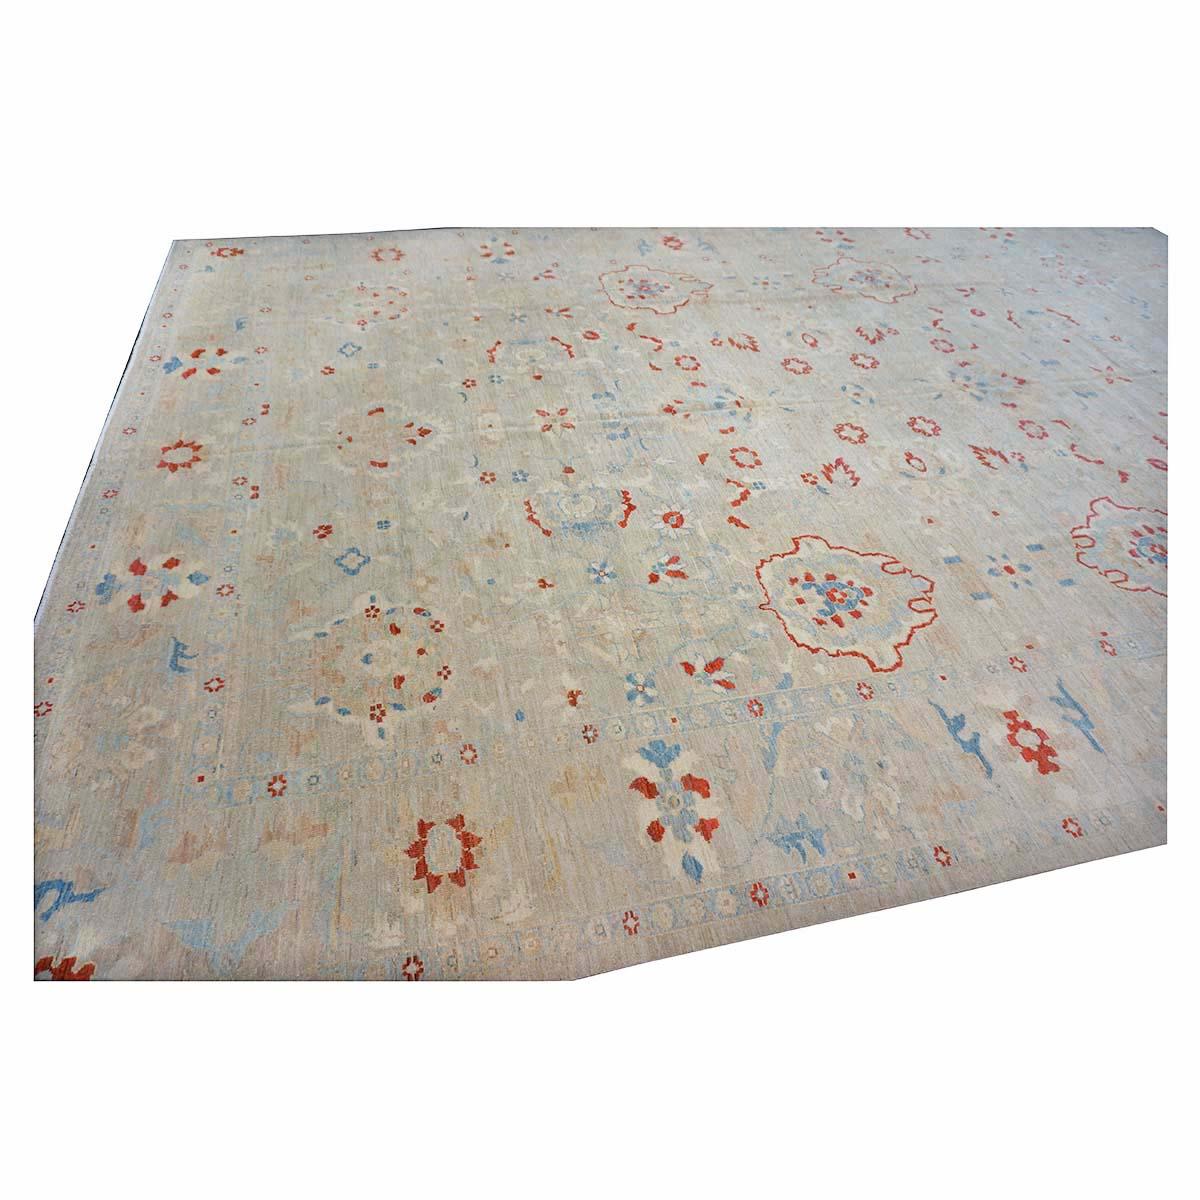 21st Century Sultanabad Master 12x17 Ivory, Red, & Blue Handmade Area Rug In Excellent Condition For Sale In Houston, TX